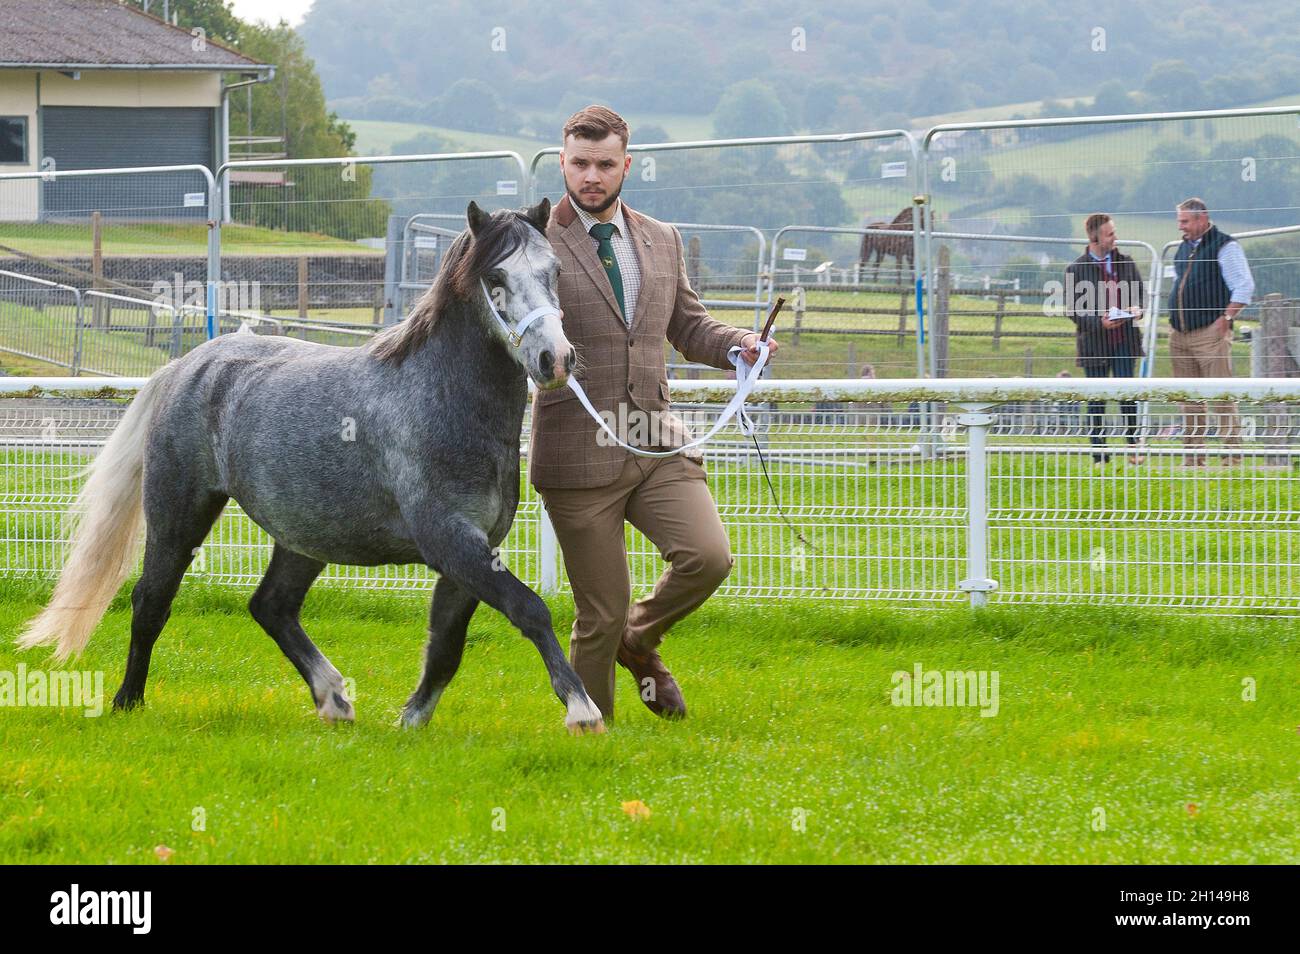 Llanelwedd, Powys, Wales, UK. 16th Oct, 2021. A gelding show takes place on the first day of the Welsh Pony & Cob sale. The Welsh Pony & Cob Society Official Sale, which has attracted 403 entries from the membership, is held by their official auctioneers McCartneys and takes place over two days at The Royal Welsh Showground in Llanelwedd, Powys, UK, attracting an audience of thousands of Welsh Pony & Cob enthusiasts worldwide. Credit: Graham M. Lawrence/Alamy Live News Stock Photo